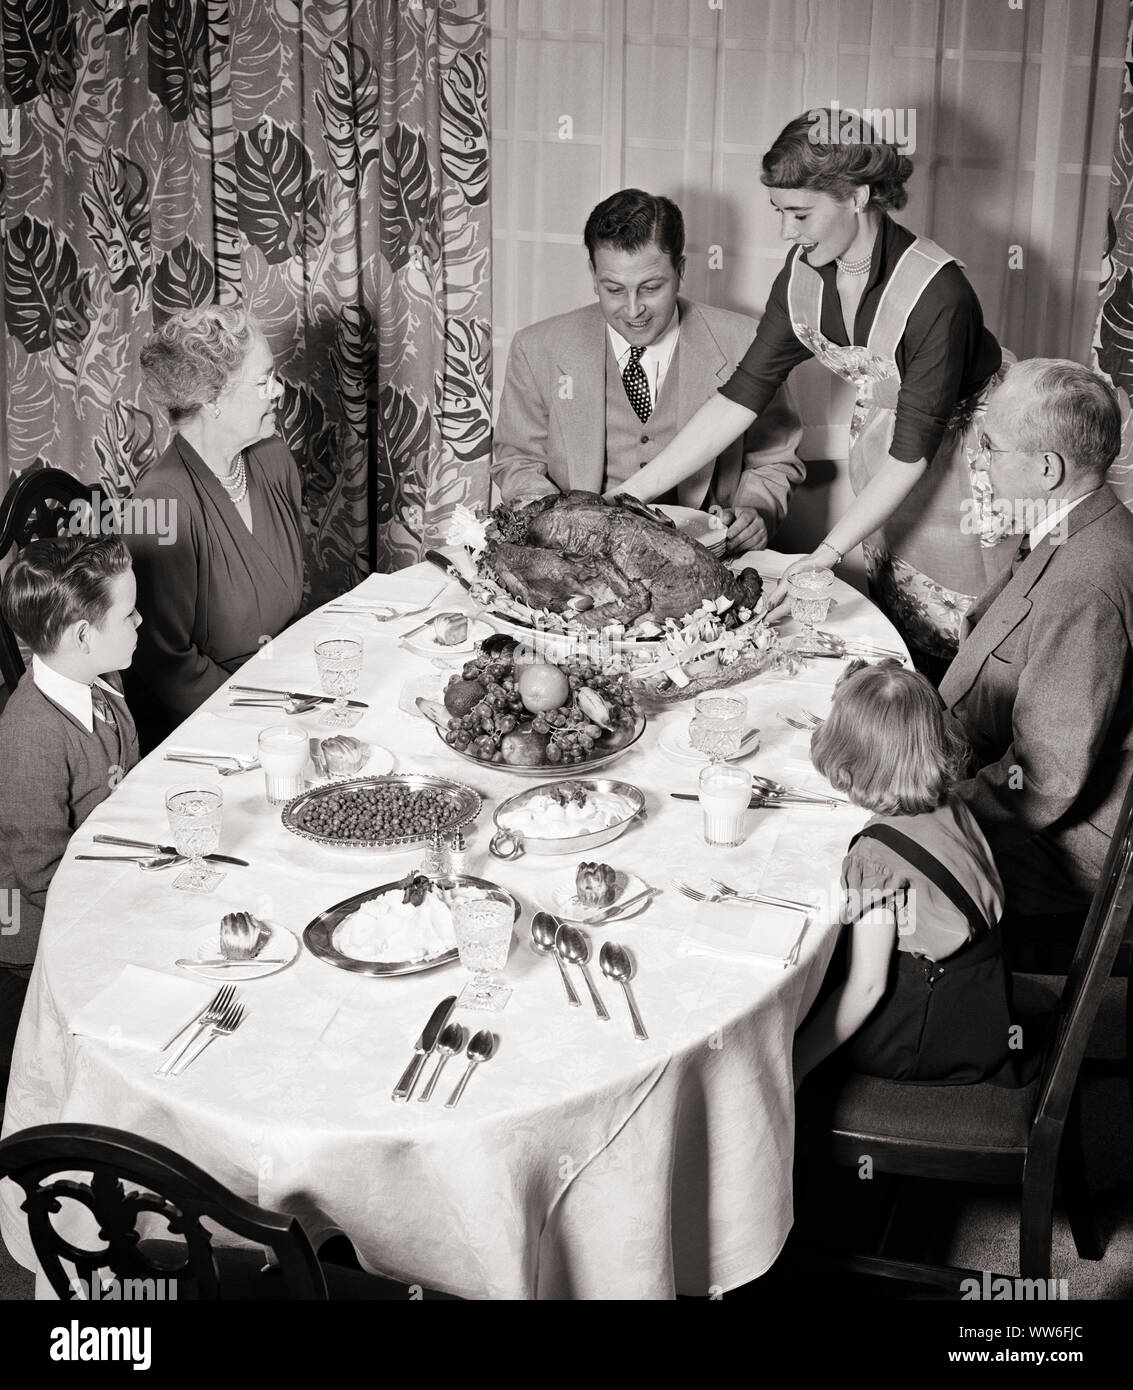 1950s THREE GENERATION FAMILY SITTING AROUND DINING ROOM TABLE AS MOTHER SERVES THANKSGIVING ROAST TURKEY - d2830 HAR001 HARS OLD TIME BUSY NOSTALGIA OLD FASHION JUVENILE TEAMWORK GRANDFATHER GRANDPARENTS PLEASED FAMILIES JOY LIFESTYLE SATISFACTION CELEBRATION FEMALES MARRIED GRANDPARENT SPOUSE HUSBANDS HEALTHINESS HOME LIFE 6 COPY SPACE HALF-LENGTH LADIES PERSONS CARING MALES SIX SPIRITUALITY SENIOR MAN AMERICANA SENIOR ADULT B&W PARTNER SENIOR WOMAN FREEDOM SUCCESS WIDE ANGLE HAPPINESS CHEERFUL STRENGTH EXCITEMENT PRIDE AS THREE GENERATION AUTHORITY GRANDMOTHERS SMILES THANKFUL GRANDFATHERS Stock Photo